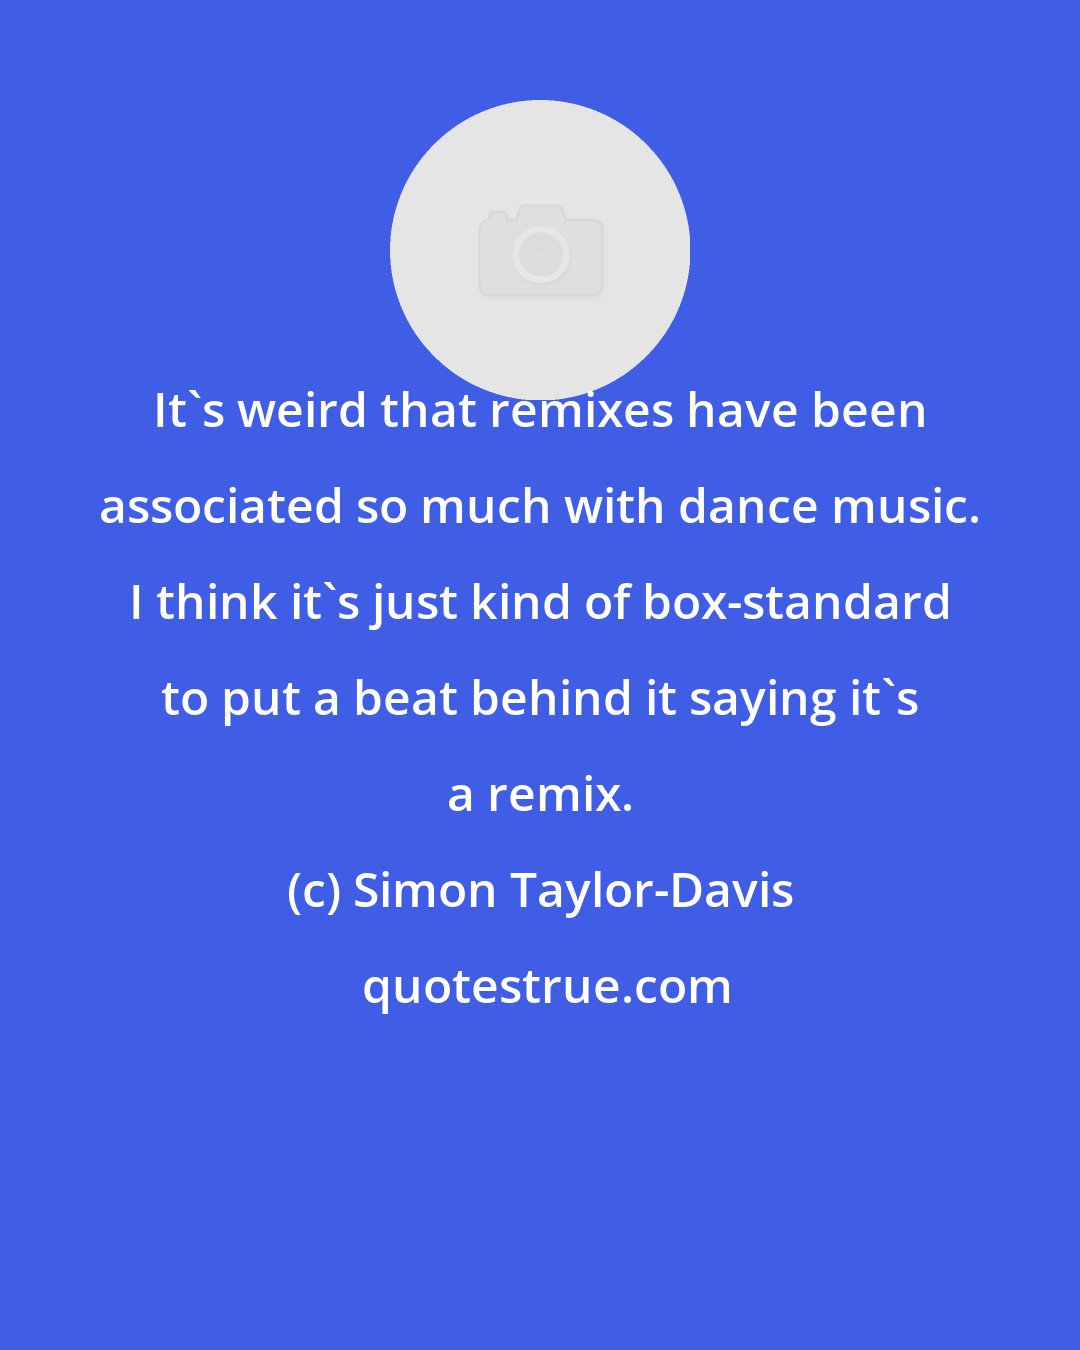 Simon Taylor-Davis: It's weird that remixes have been associated so much with dance music. I think it's just kind of box-standard to put a beat behind it saying it's a remix.